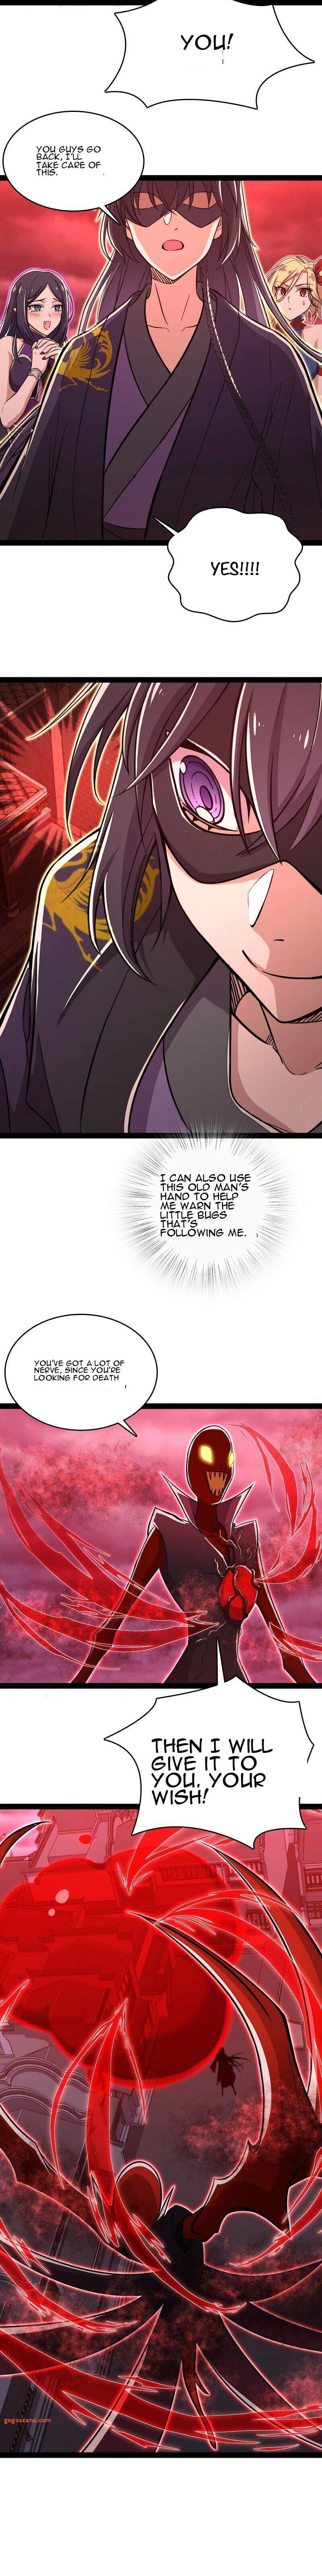 Life of a War Emperor After Retirement Chapter 79 page 2